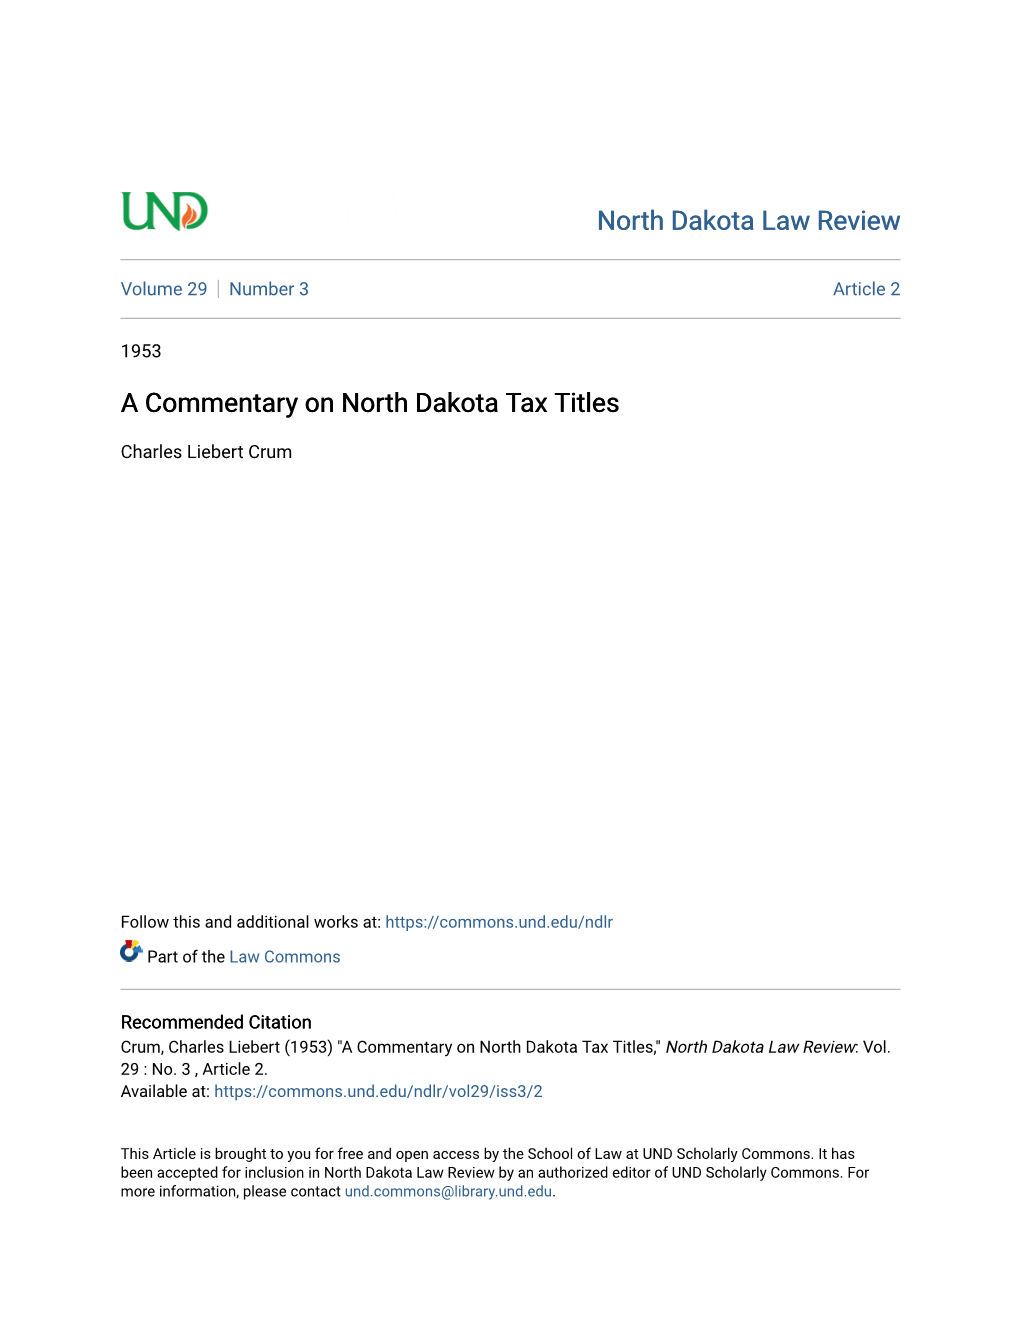 A Commentary on North Dakota Tax Titles